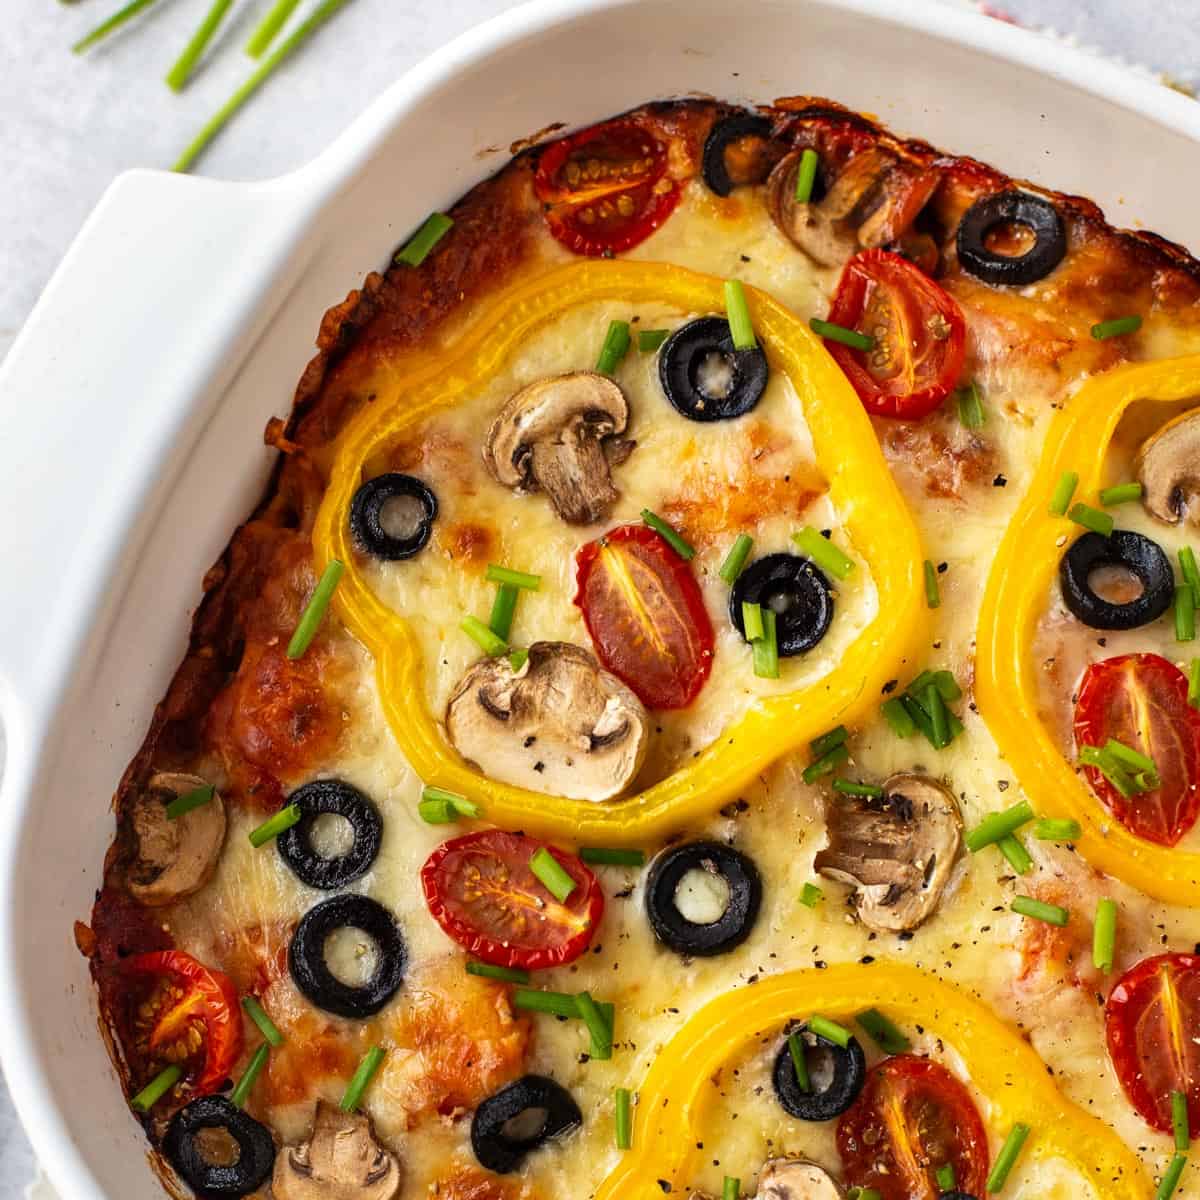 Pizza baked gnocchi topped with peppers, mushrooms and black olives.